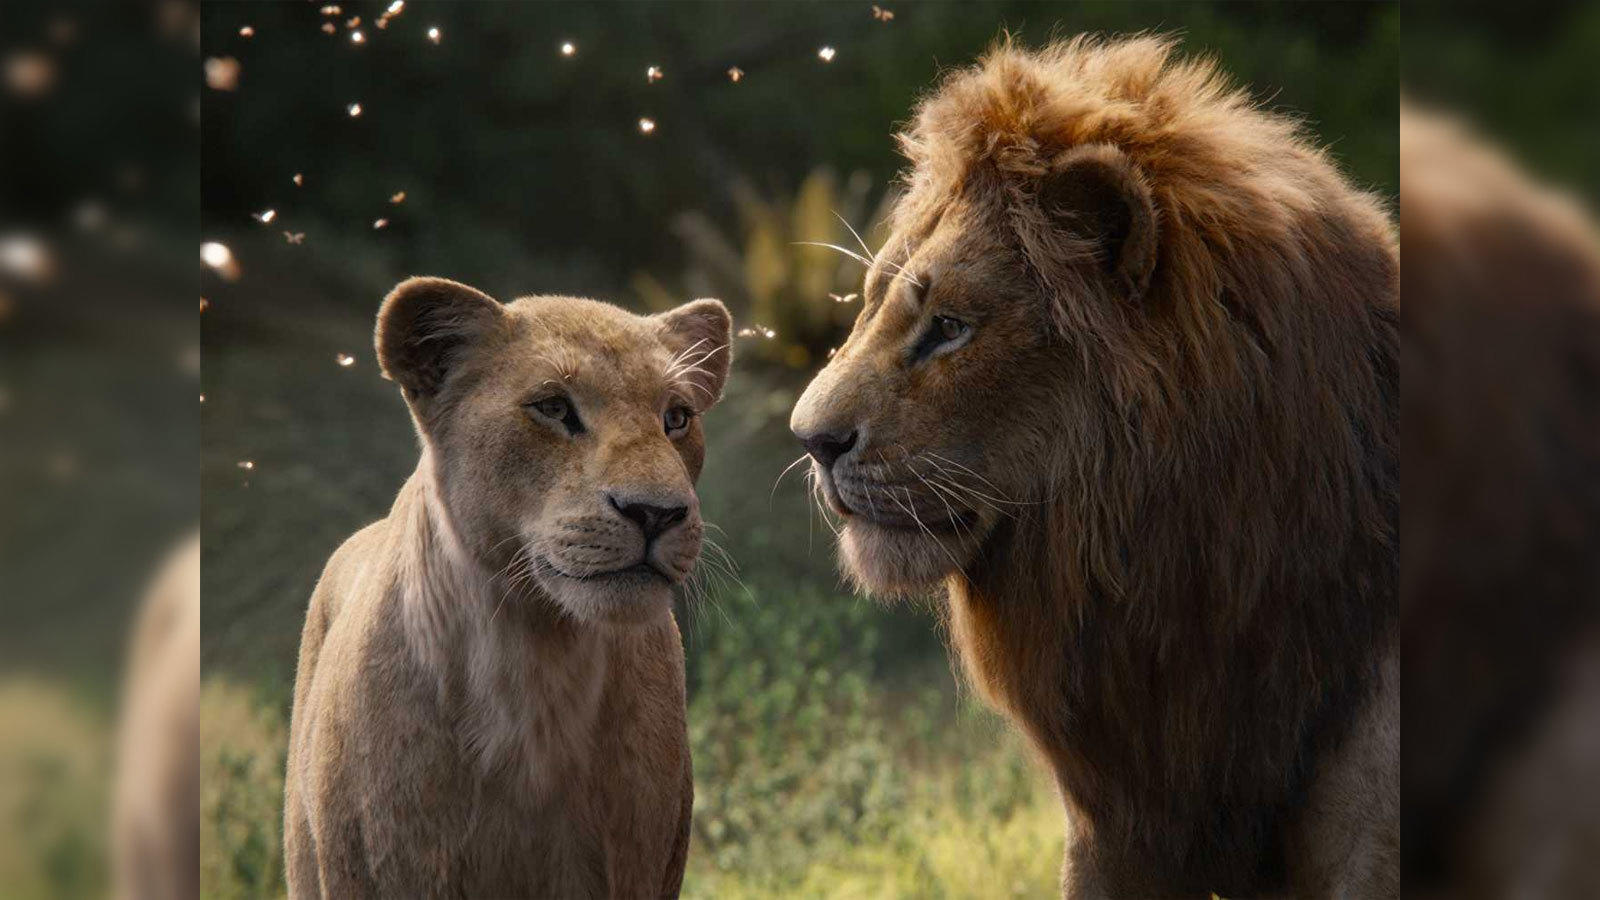 The Lion King: 'The Lion King' review: Film is worth a trip to the theatre  - The Economic Times